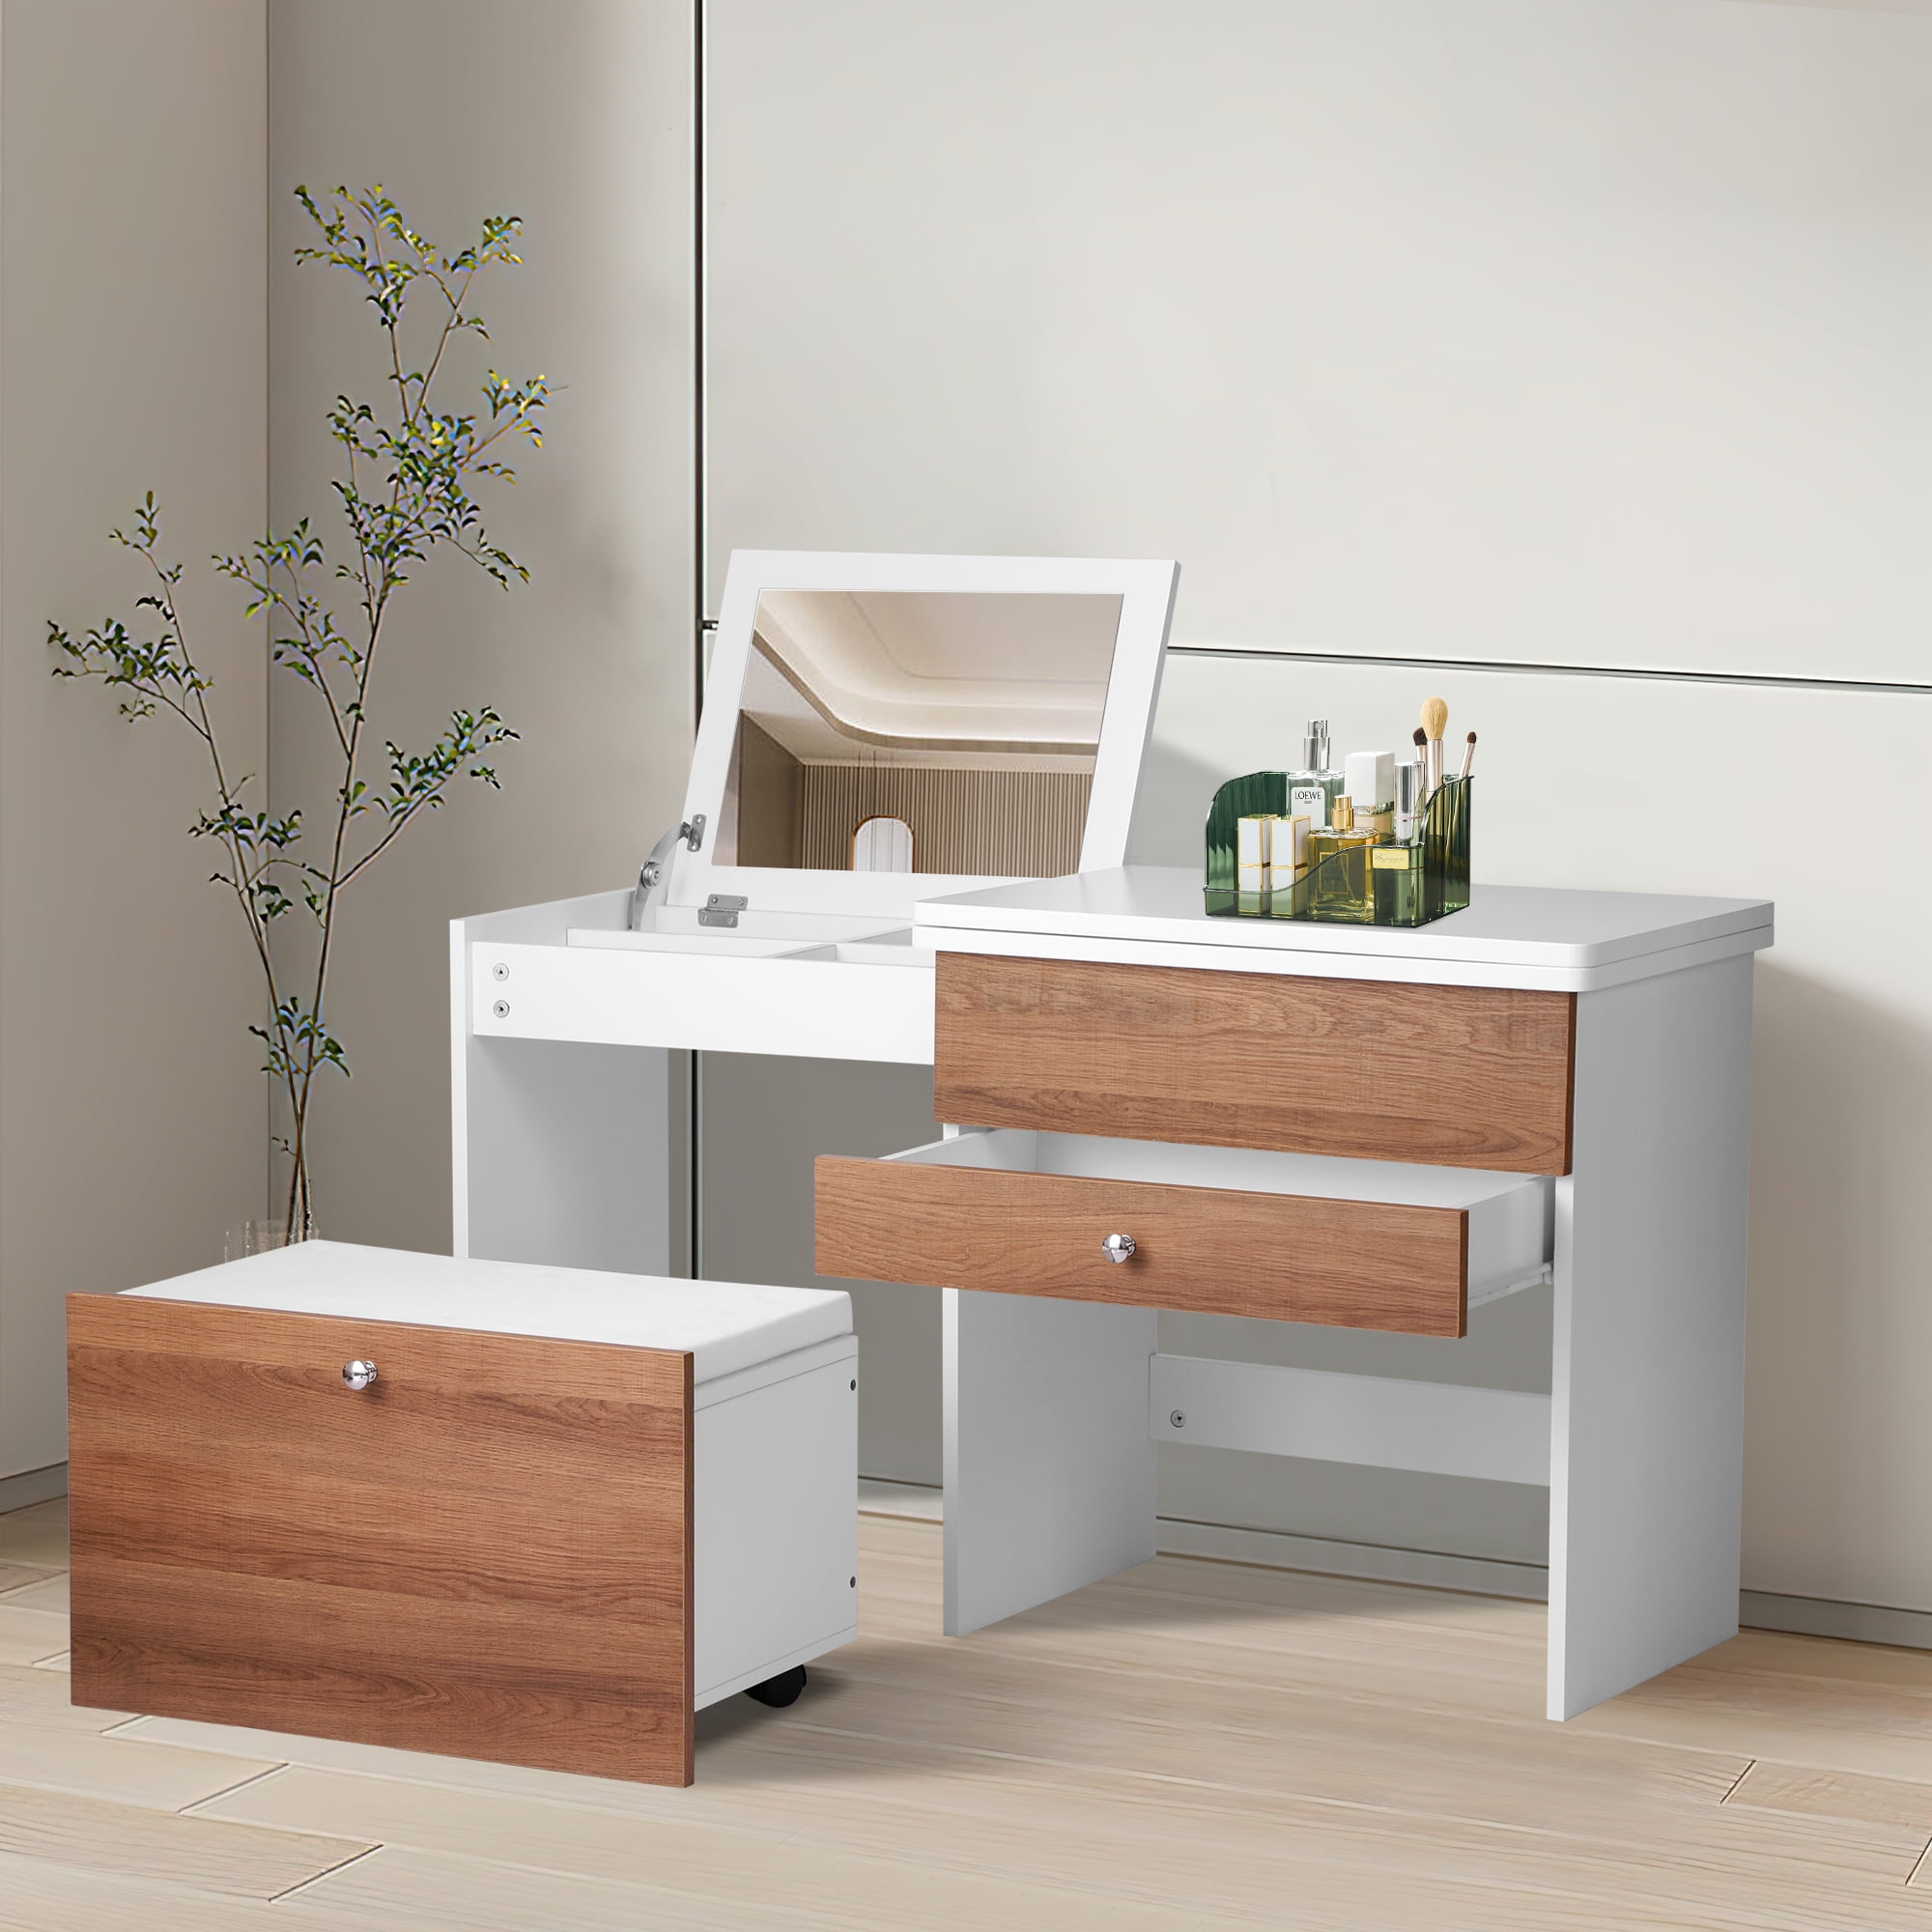 35+ Stylish Dressing Table Design For Your Room To Match Your Style